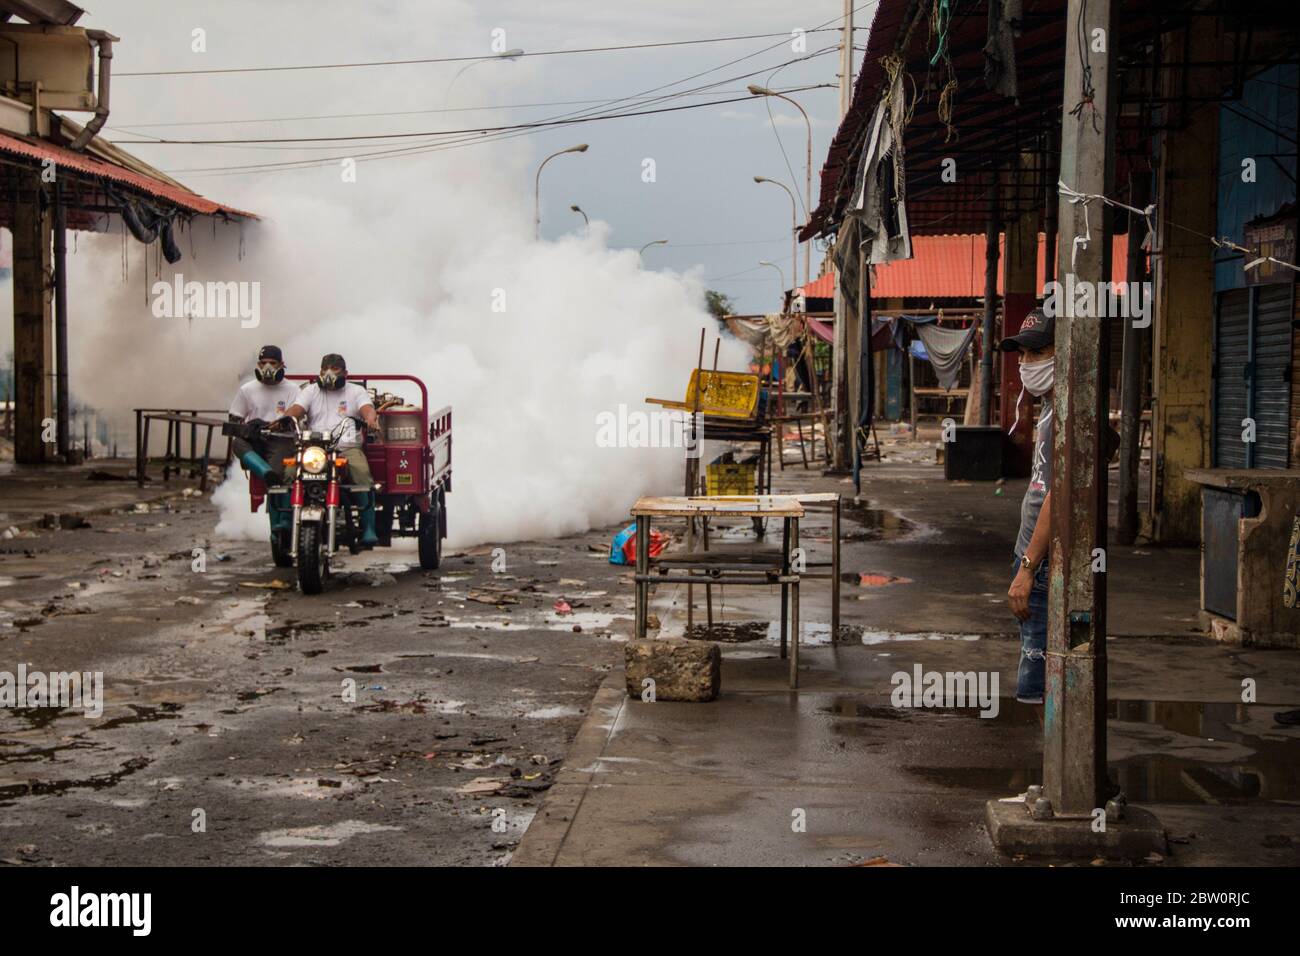 Maracaibo, Venezuela. 28th May, 2020. Two men with face masks drive through the market 'Las Pulgas' and spray disinfectant against the spread of the corona virus. The market, which was considered a critical source of infection, was closed on 24 May. The Venezuelan government has identified 1,245 Covid-19 infected people nationwide. According to official sources, 11 people are believed to have died from Coronavirus. Credit: Maria Fernanda Munoz/dpa/Alamy Live News Stock Photo